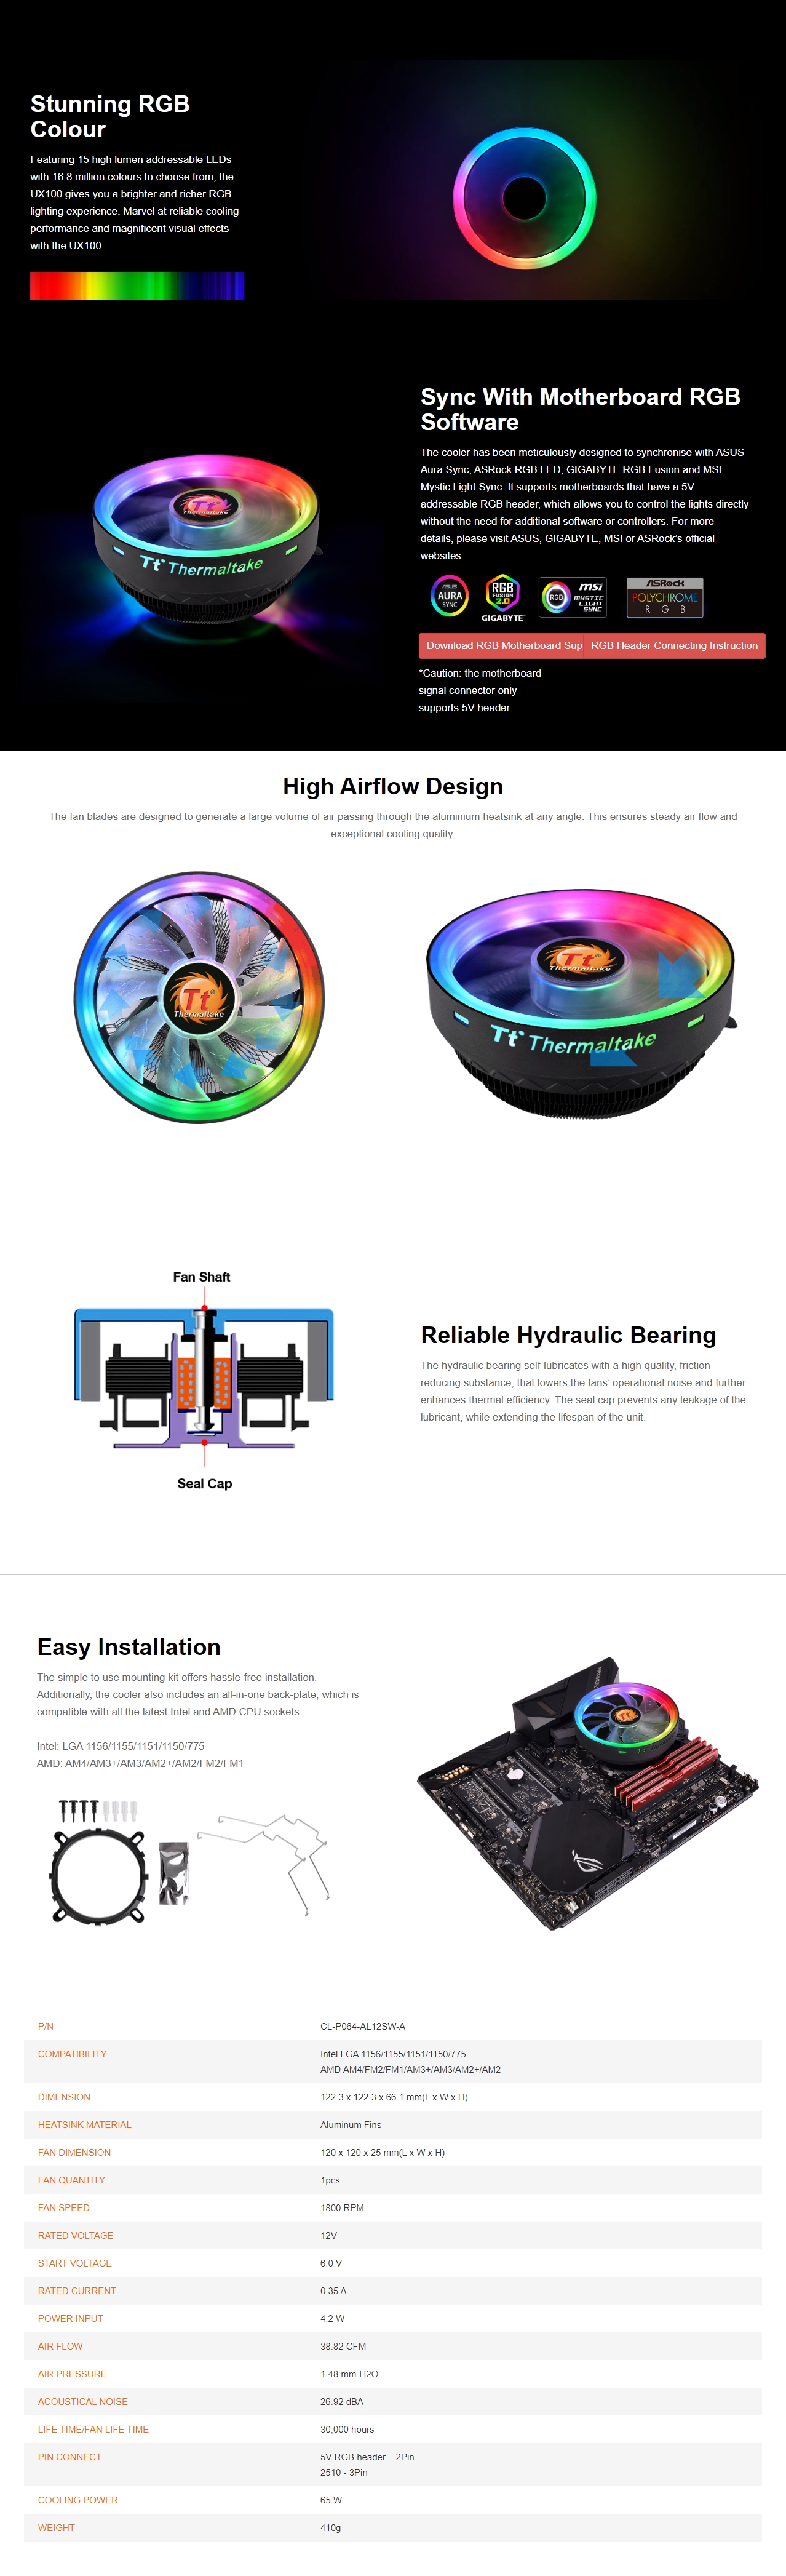 A large marketing image providing additional information about the product Thermaltake UX100 - ARGB Low Profile CPU Cooler - Additional alt info not provided